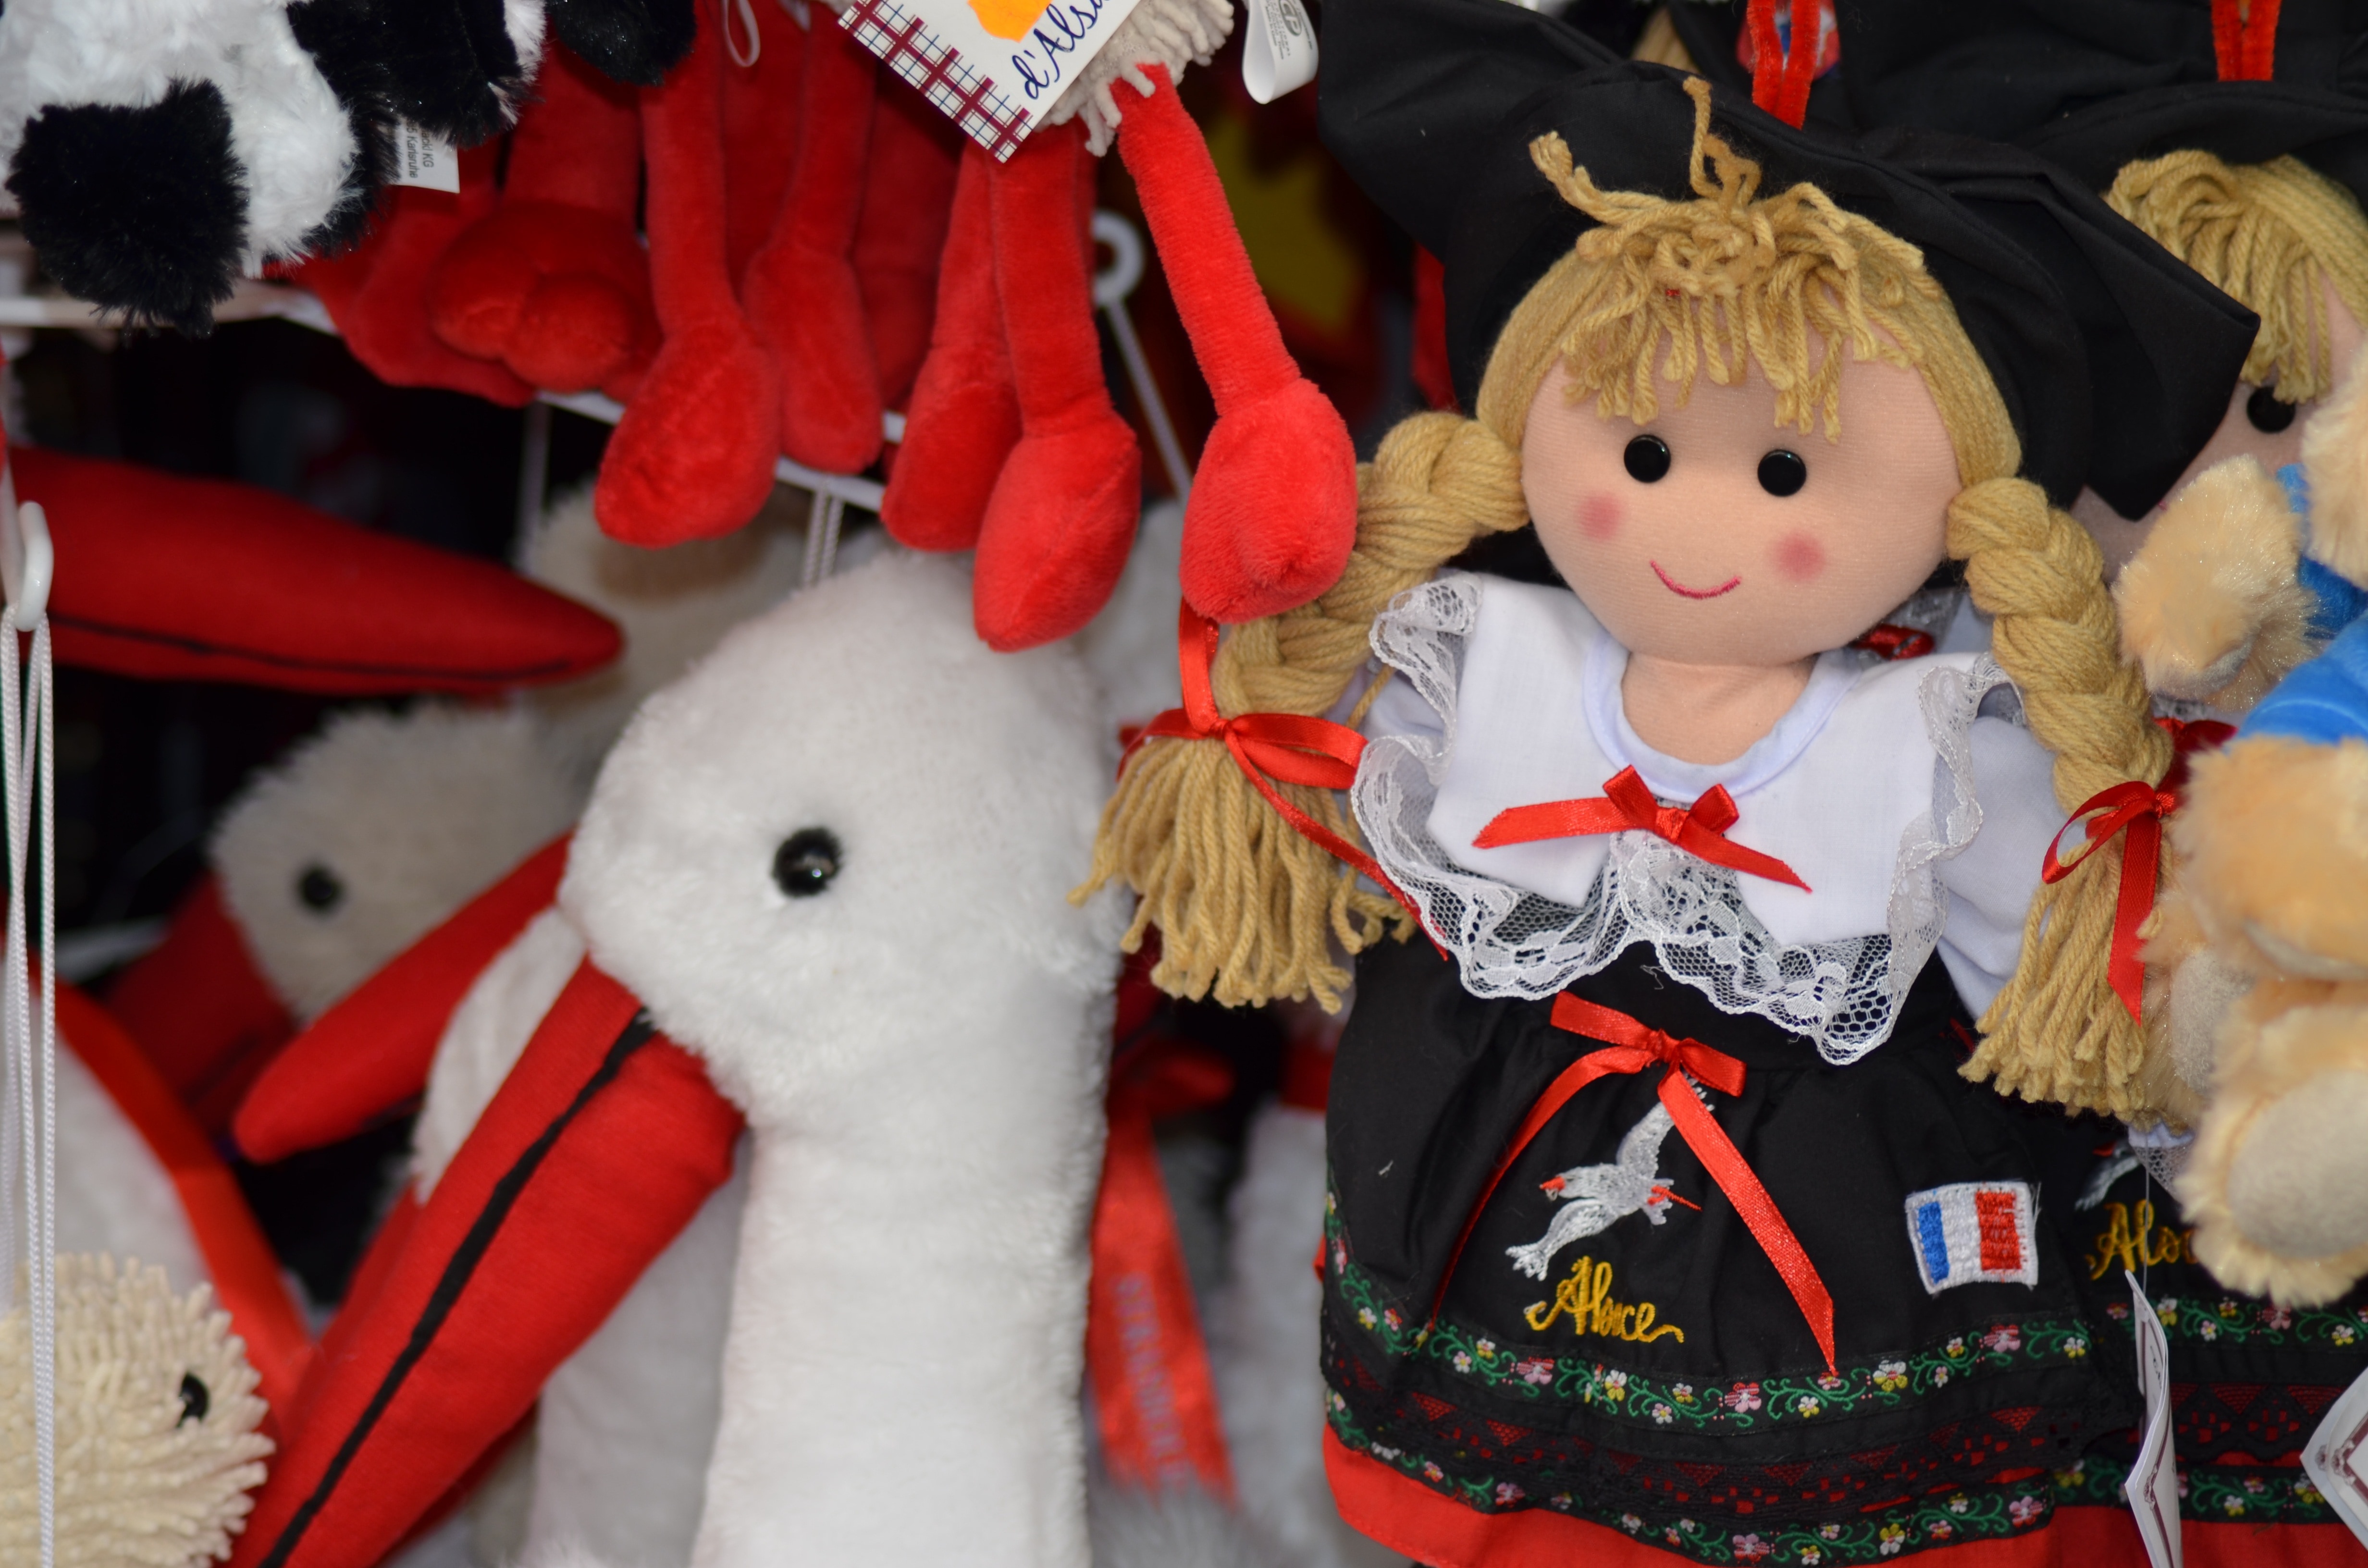 close up photo of white and red duck plush toy and rag doll in black dress